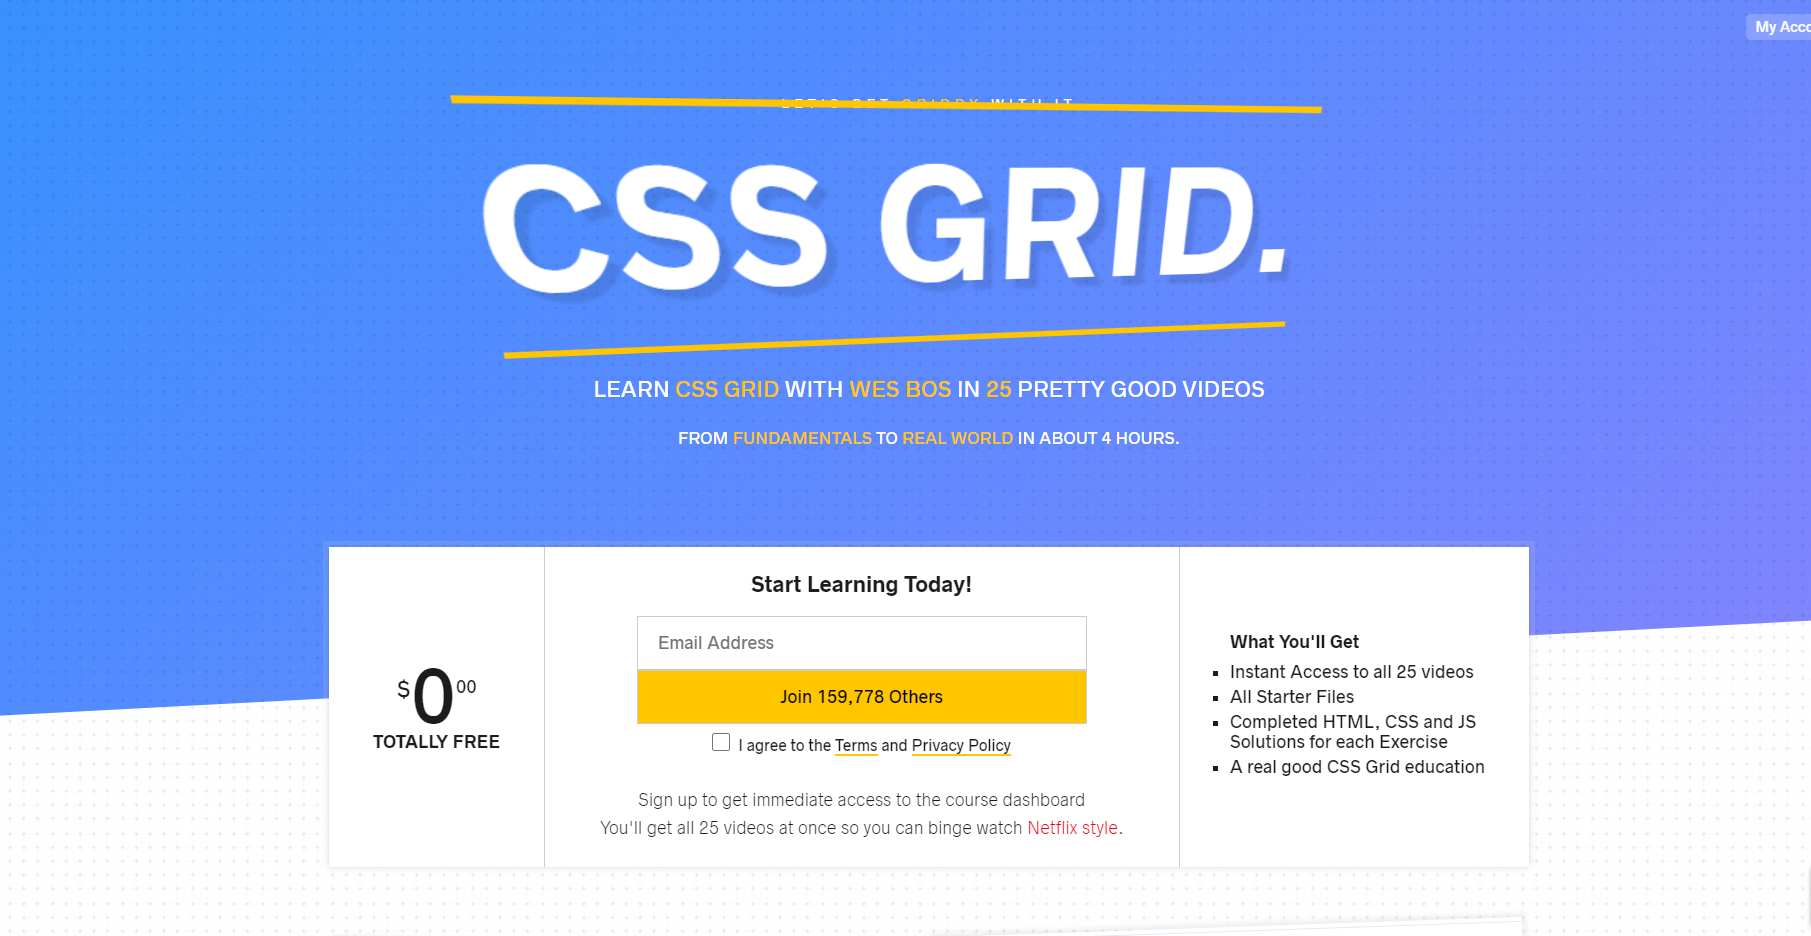 CSS Grid Layout by Wes Bos